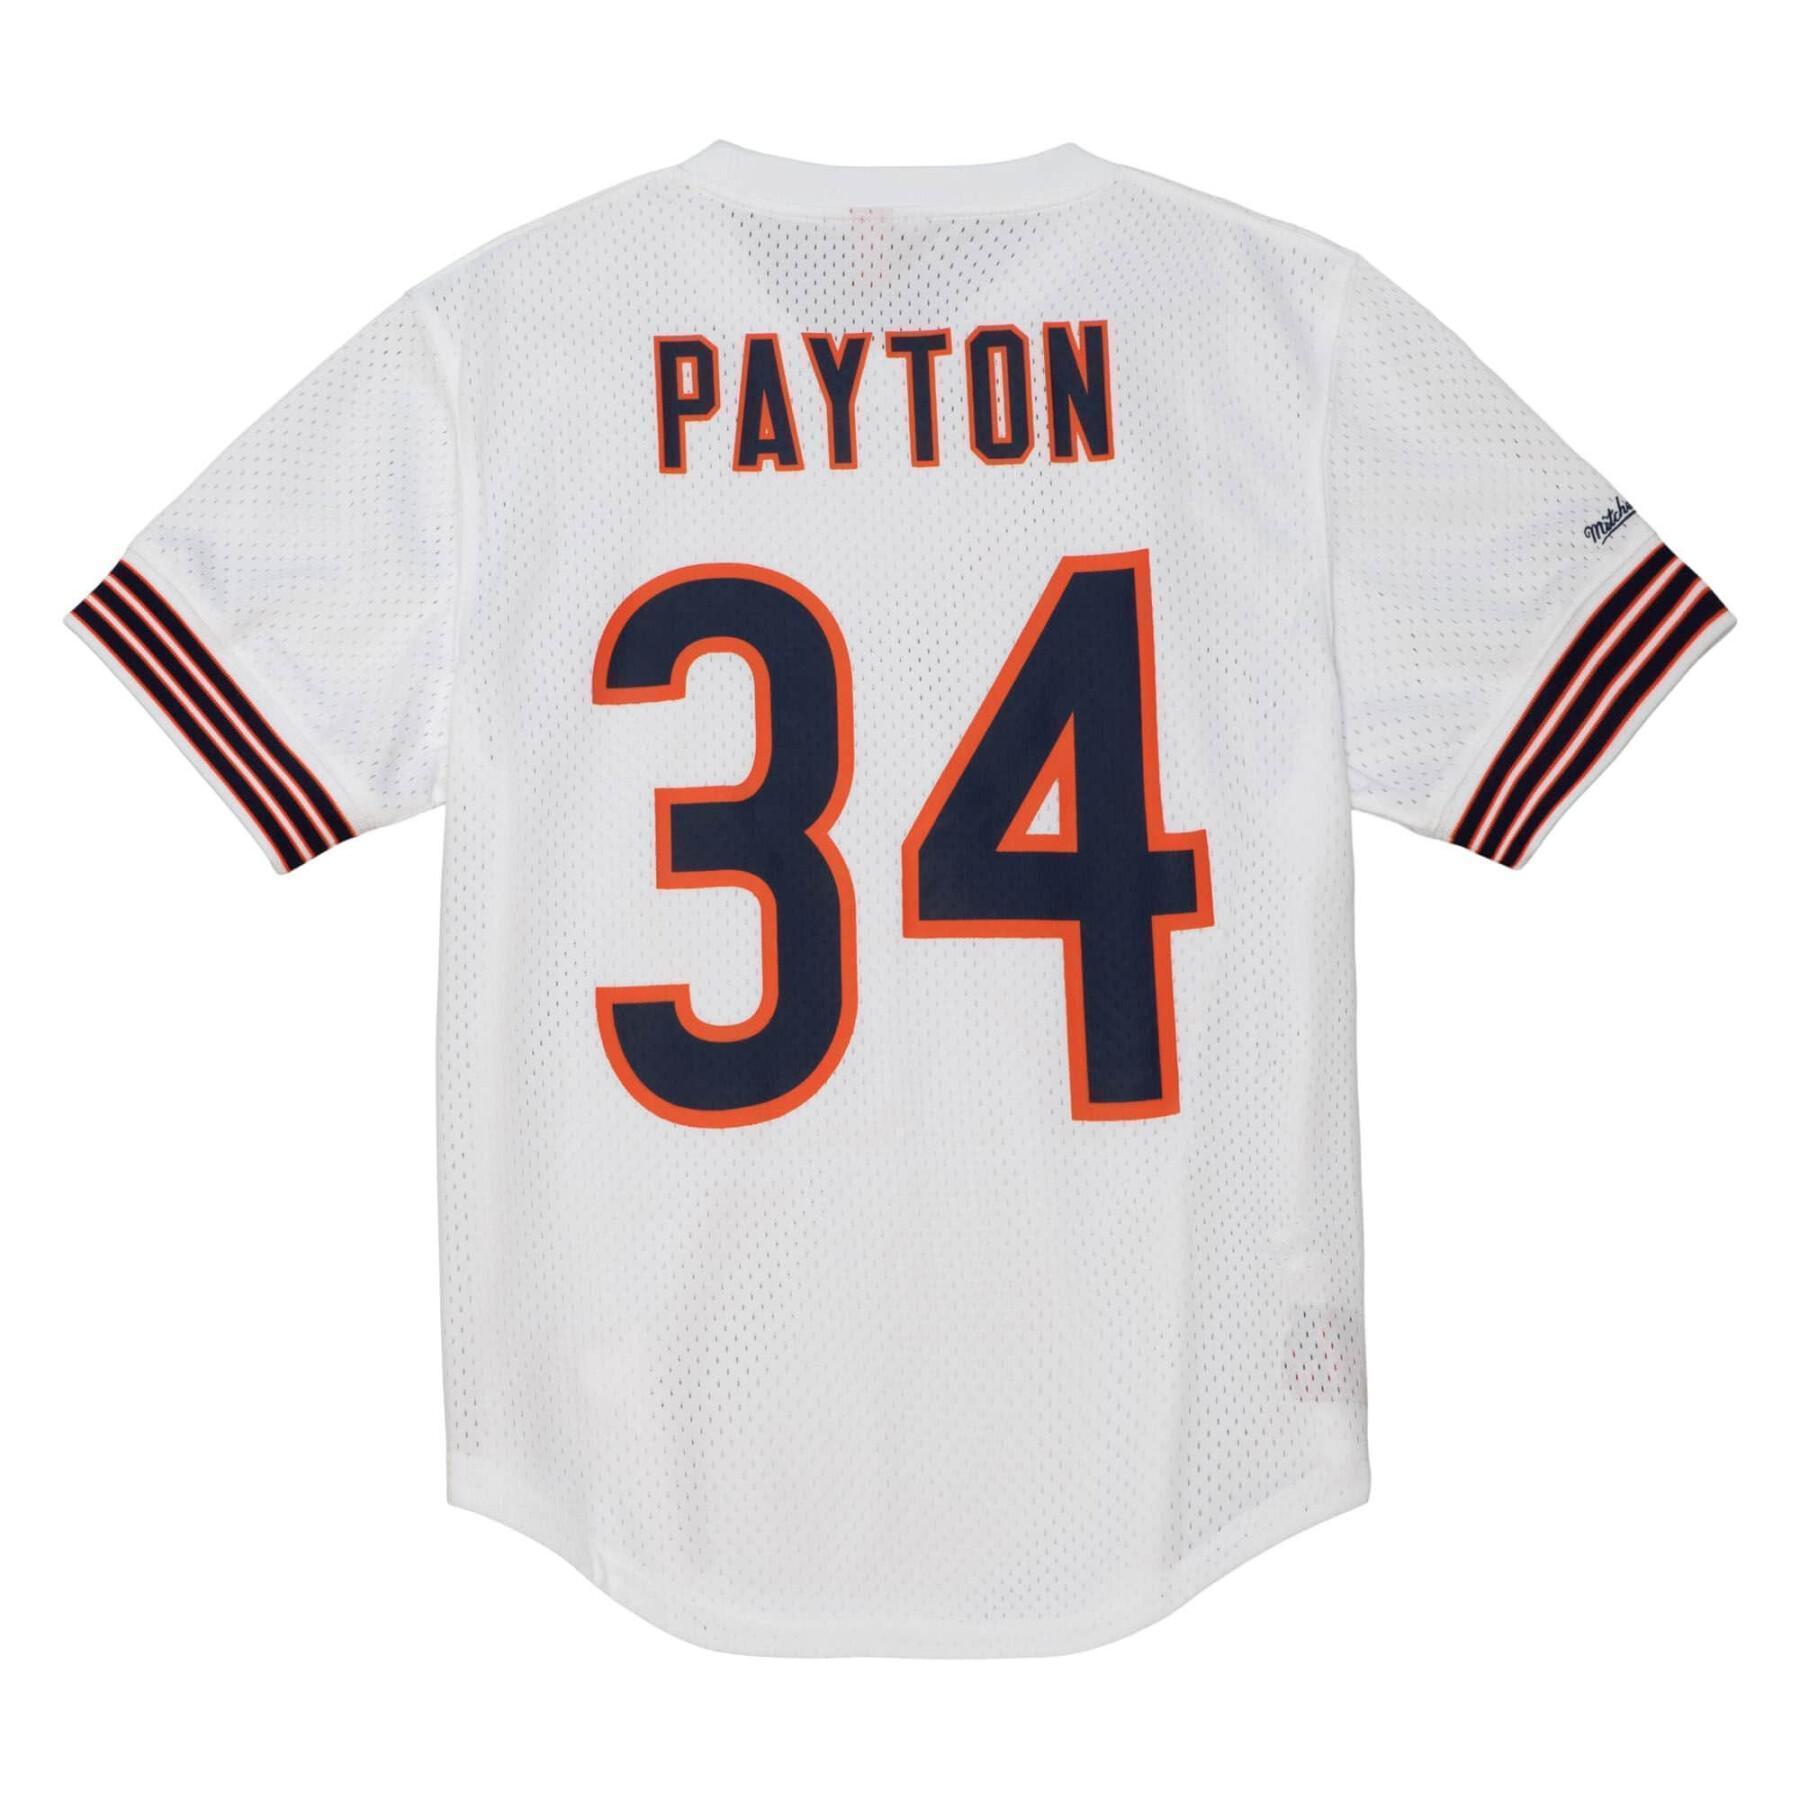 Maillot col rond Chicago Bears NFL N&N 1983 Walter Payton